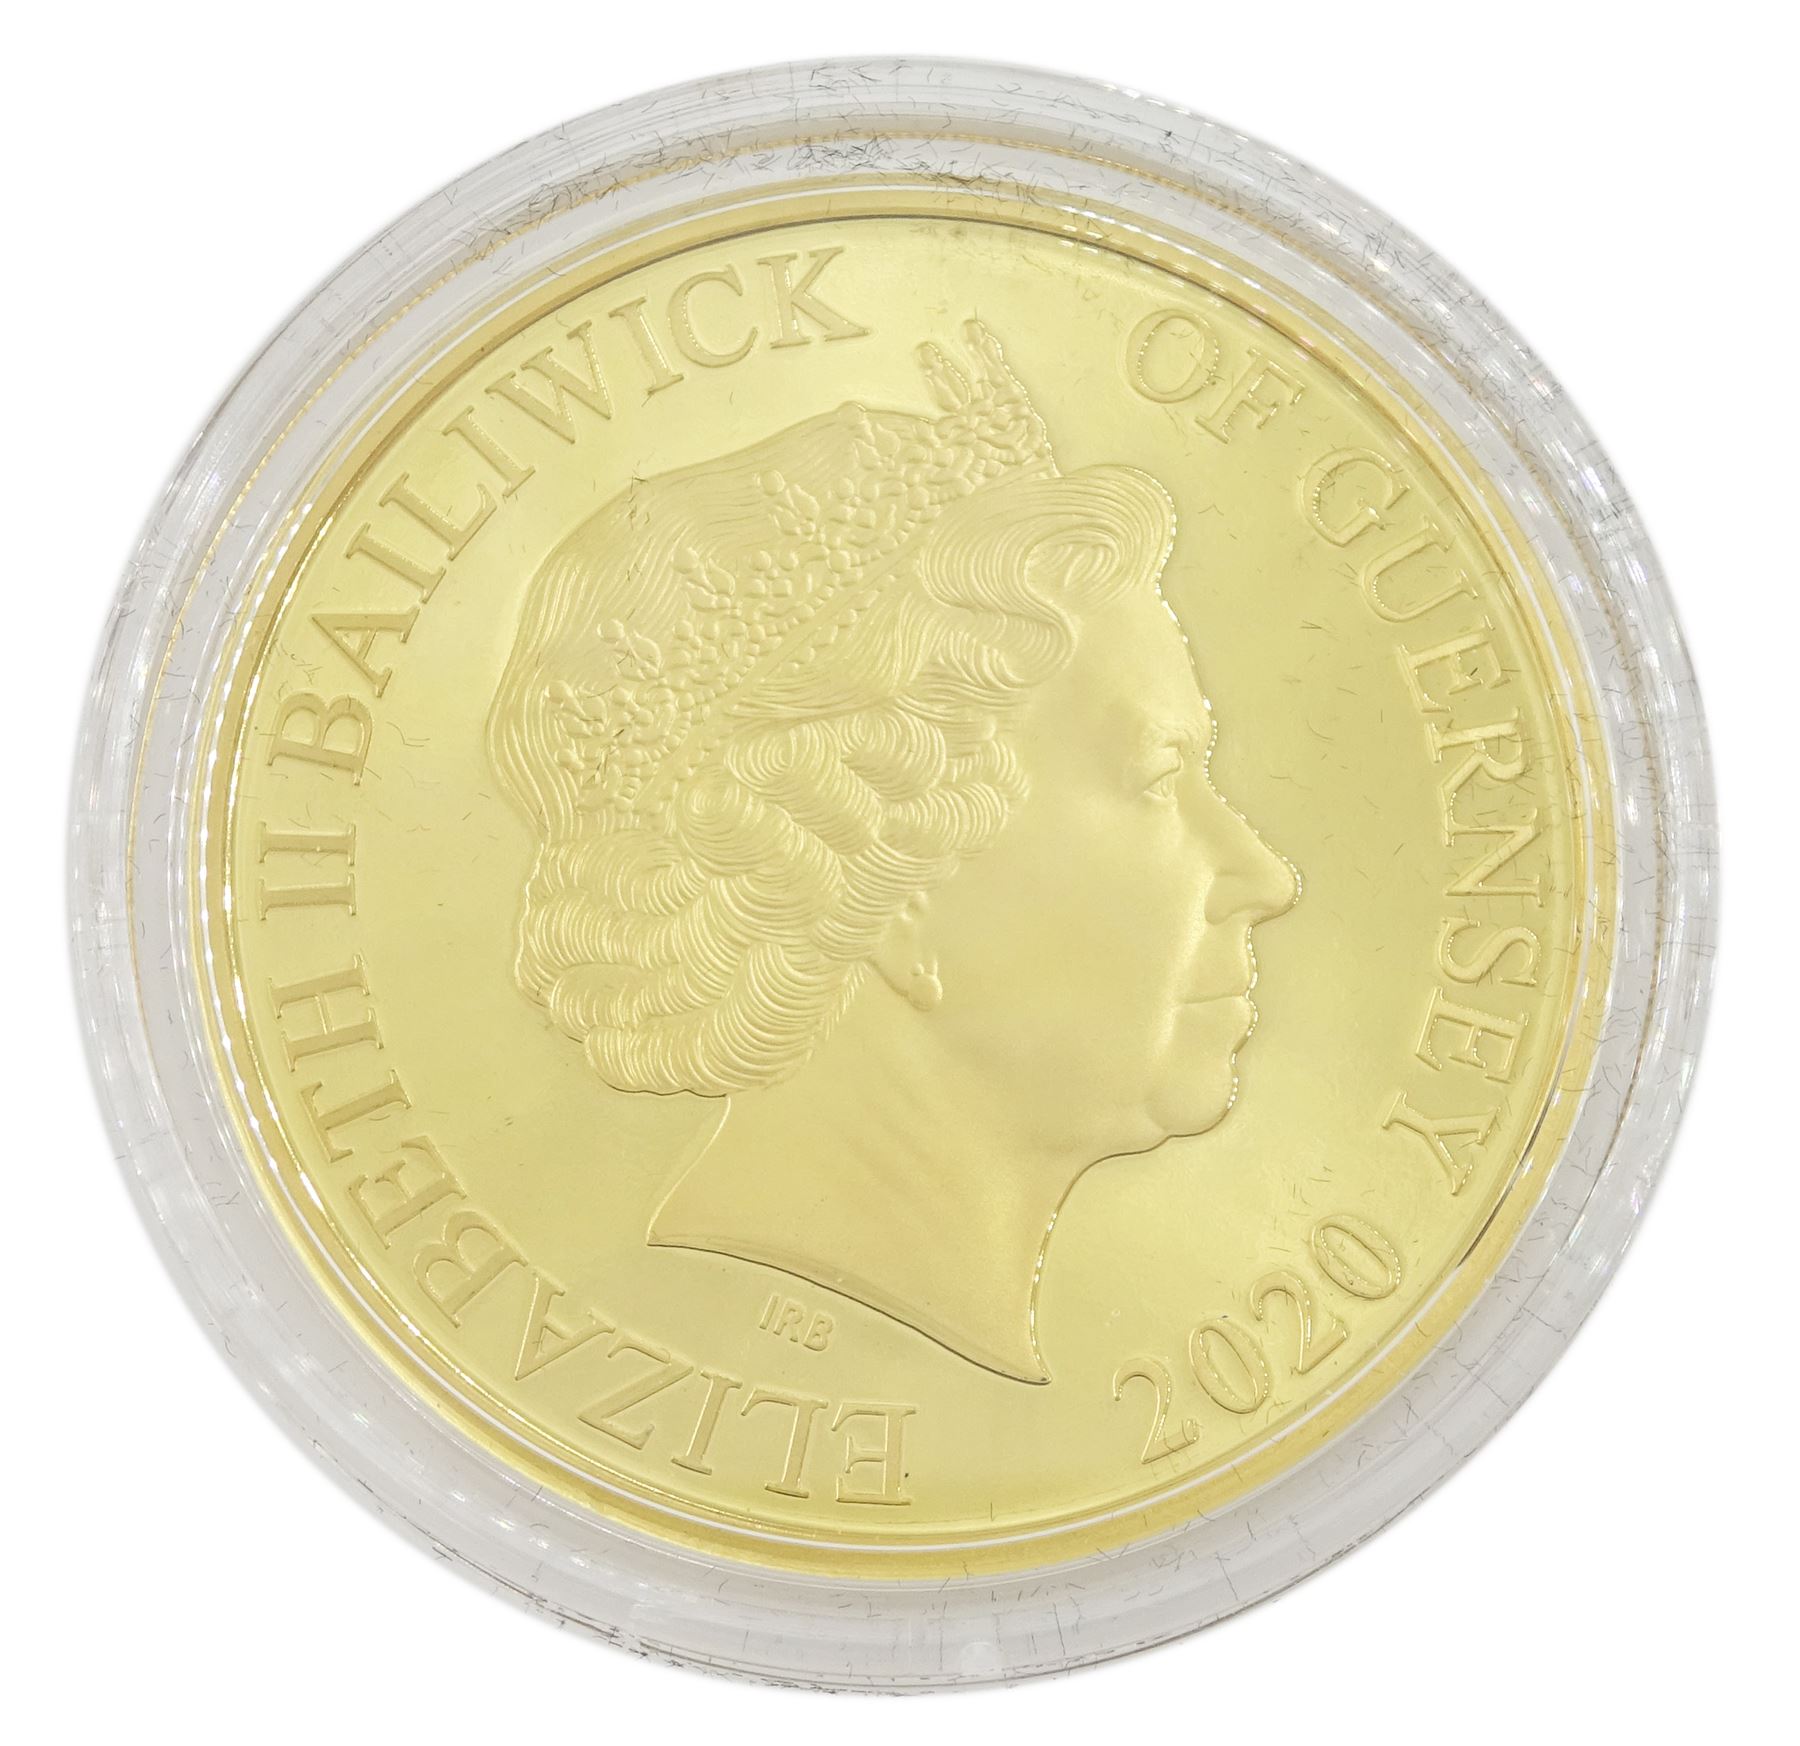 Queen Elizabeth II Guernsey 2020 '75th Anniversary VE Day Victory in Europe' 22ct gold proof five po - Image 2 of 4